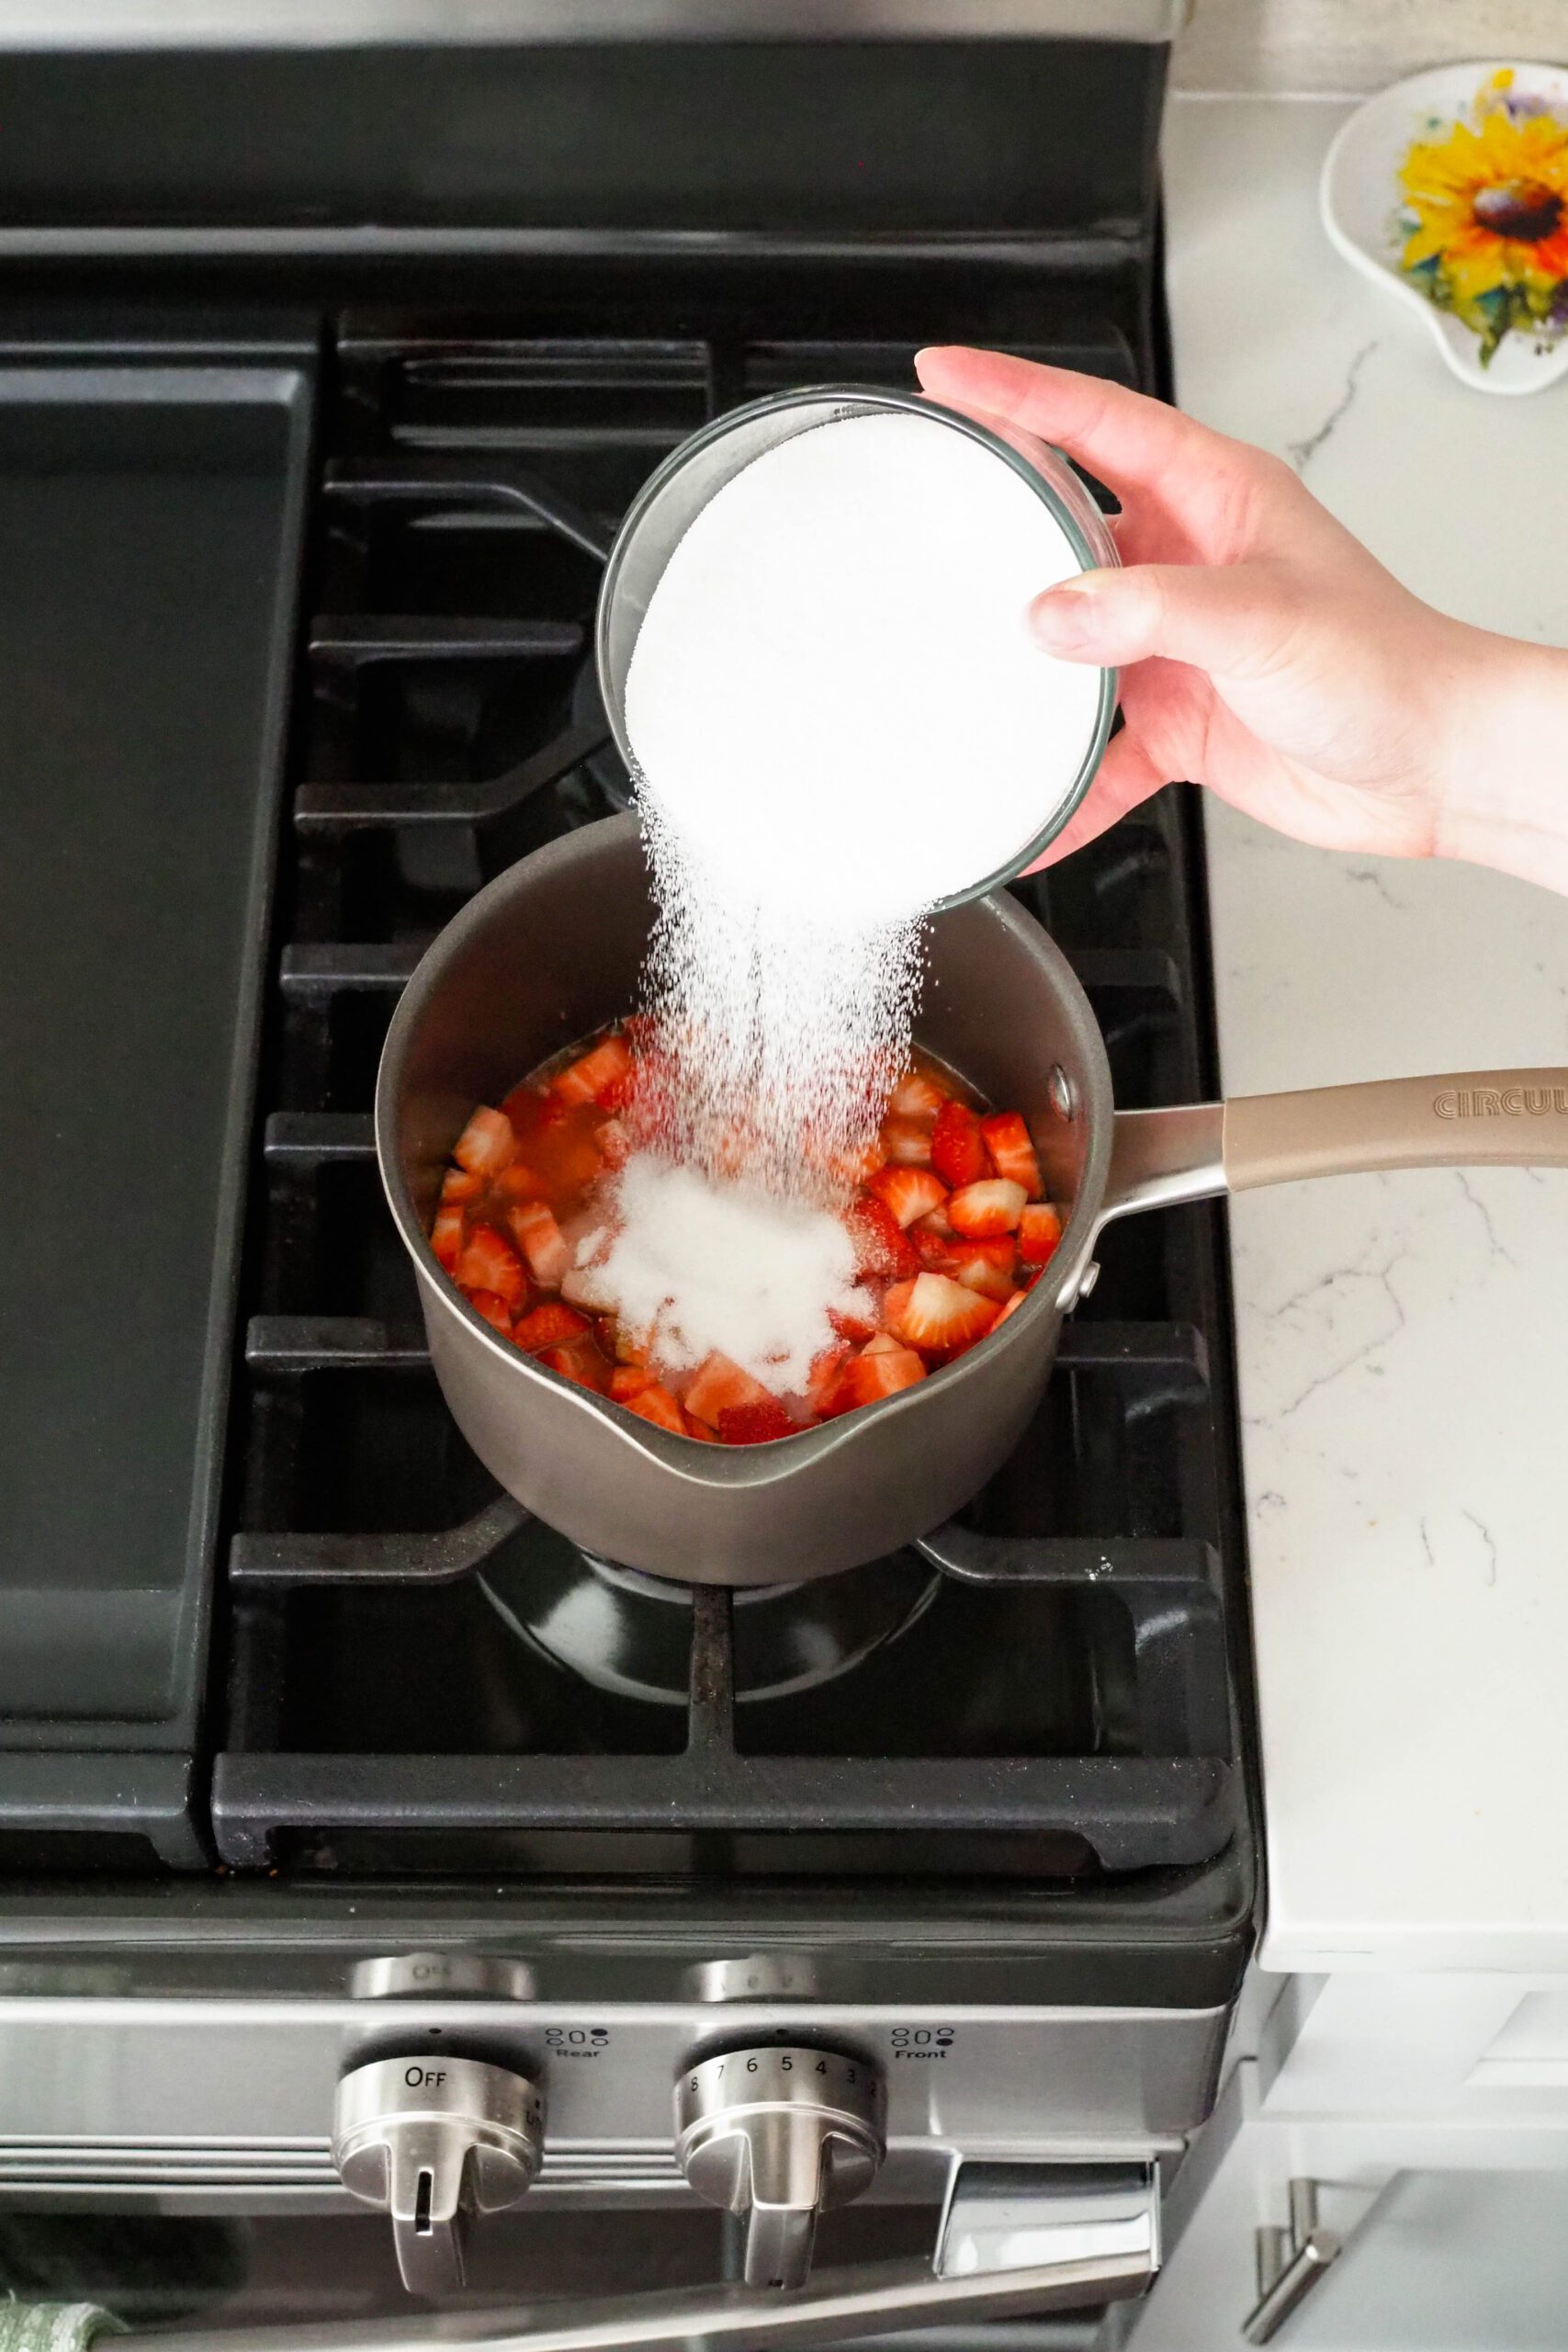 Sugar is poured into a saucepan with diced strawberries.